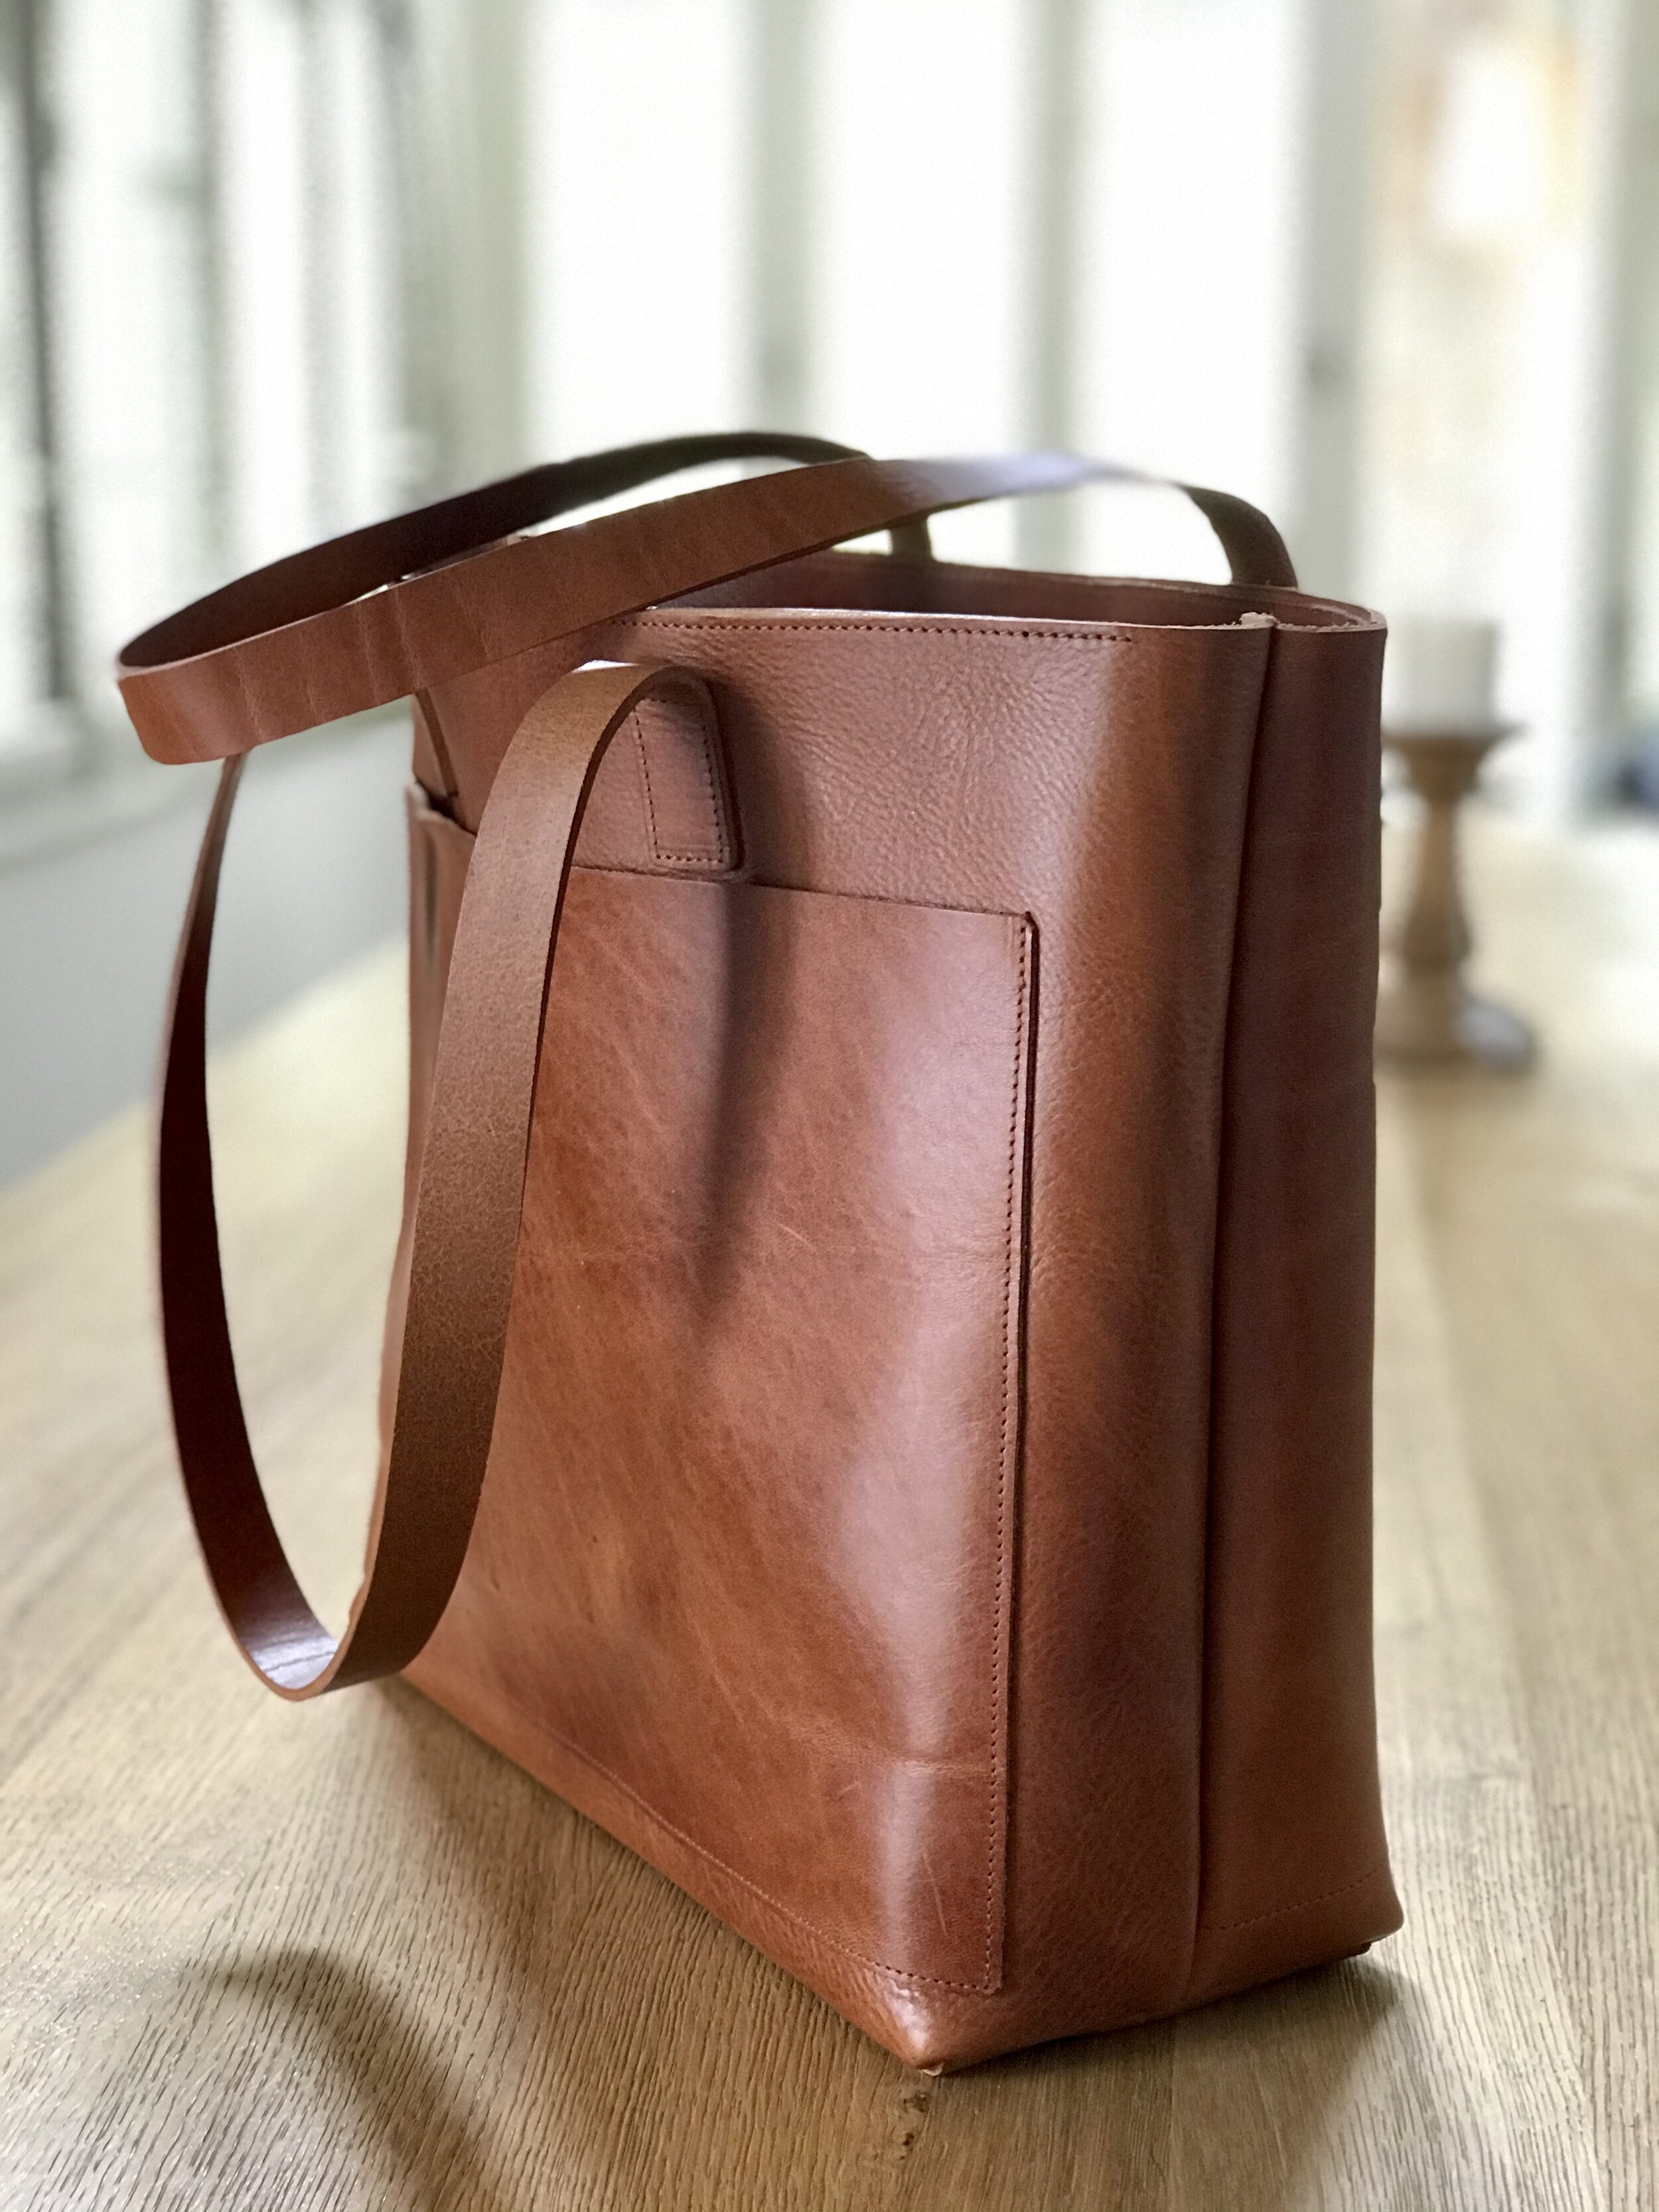 small shopper crossbody leather tote with opional zipper Lenie! Small leather tote bag woman interior zipper pocket distressed leather